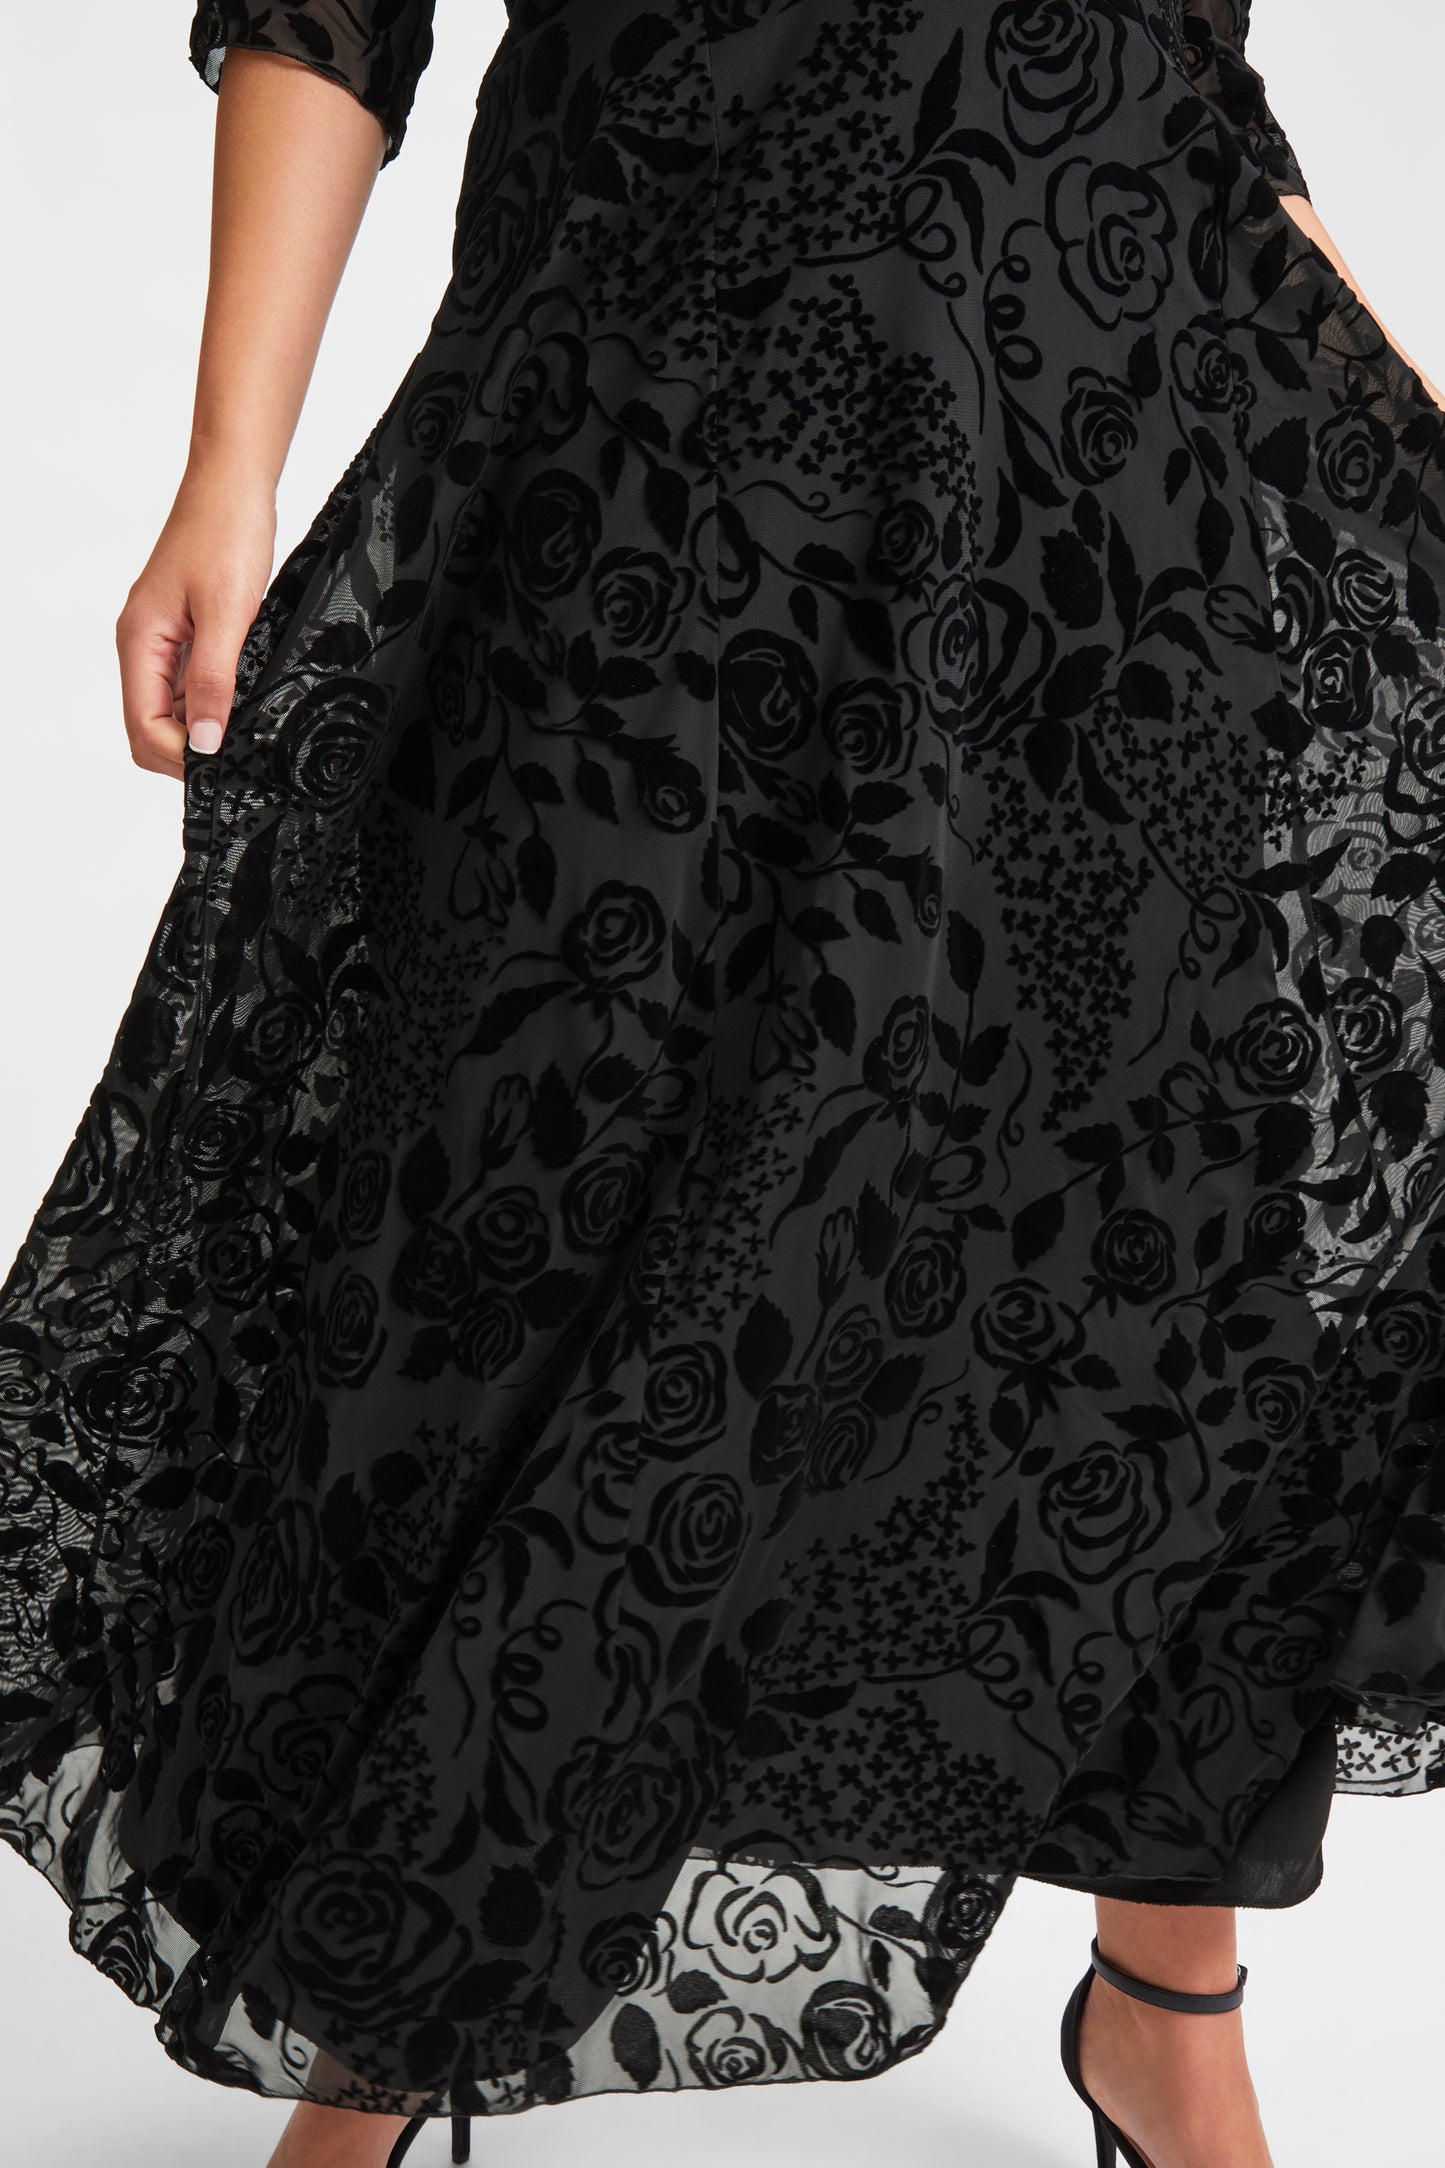 Load image into Gallery viewer, Verity Black Velvet Flock Maxi Gown
